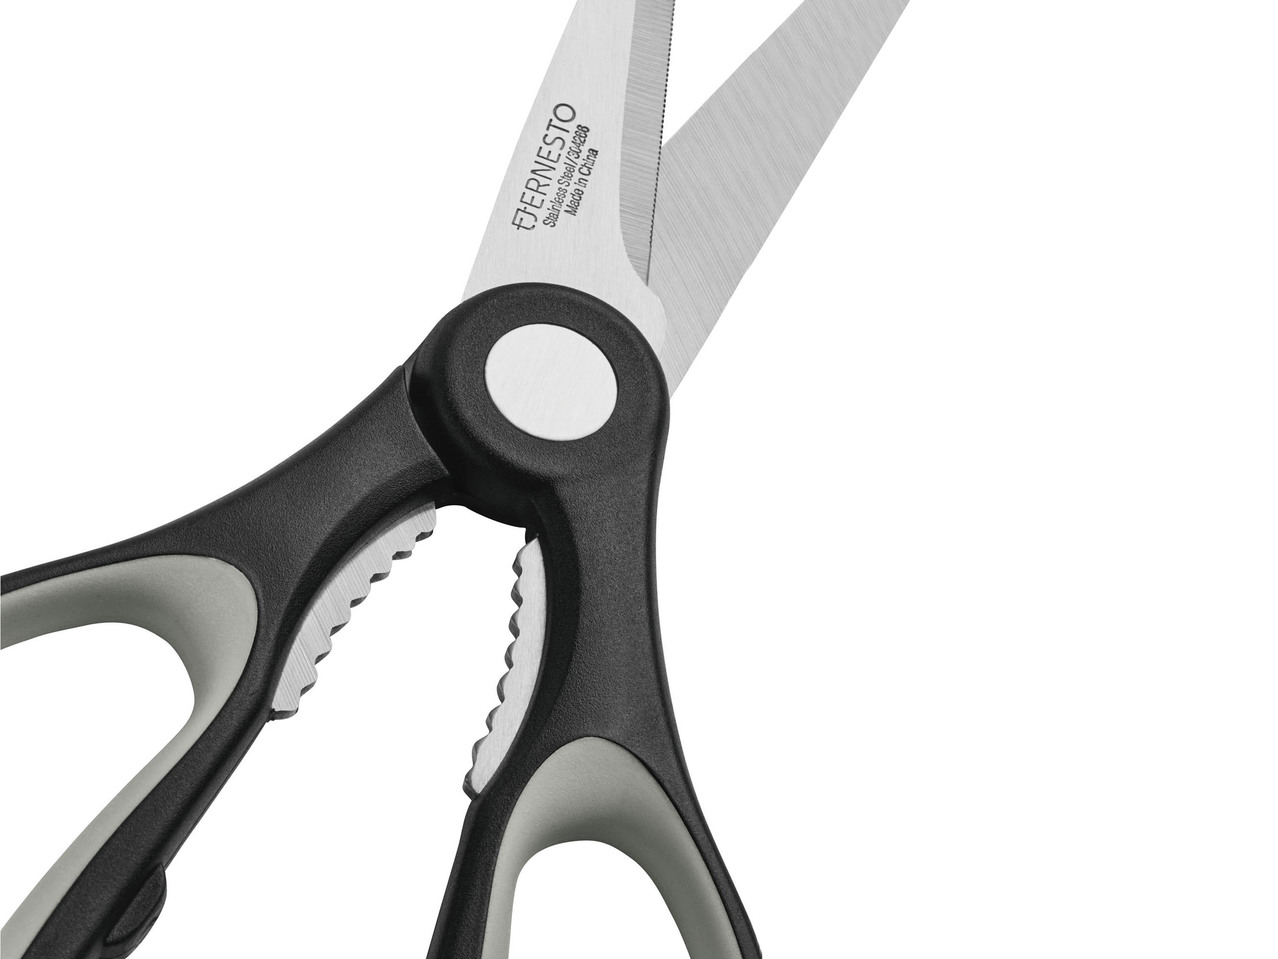 Poultry Shears or Household Scissors